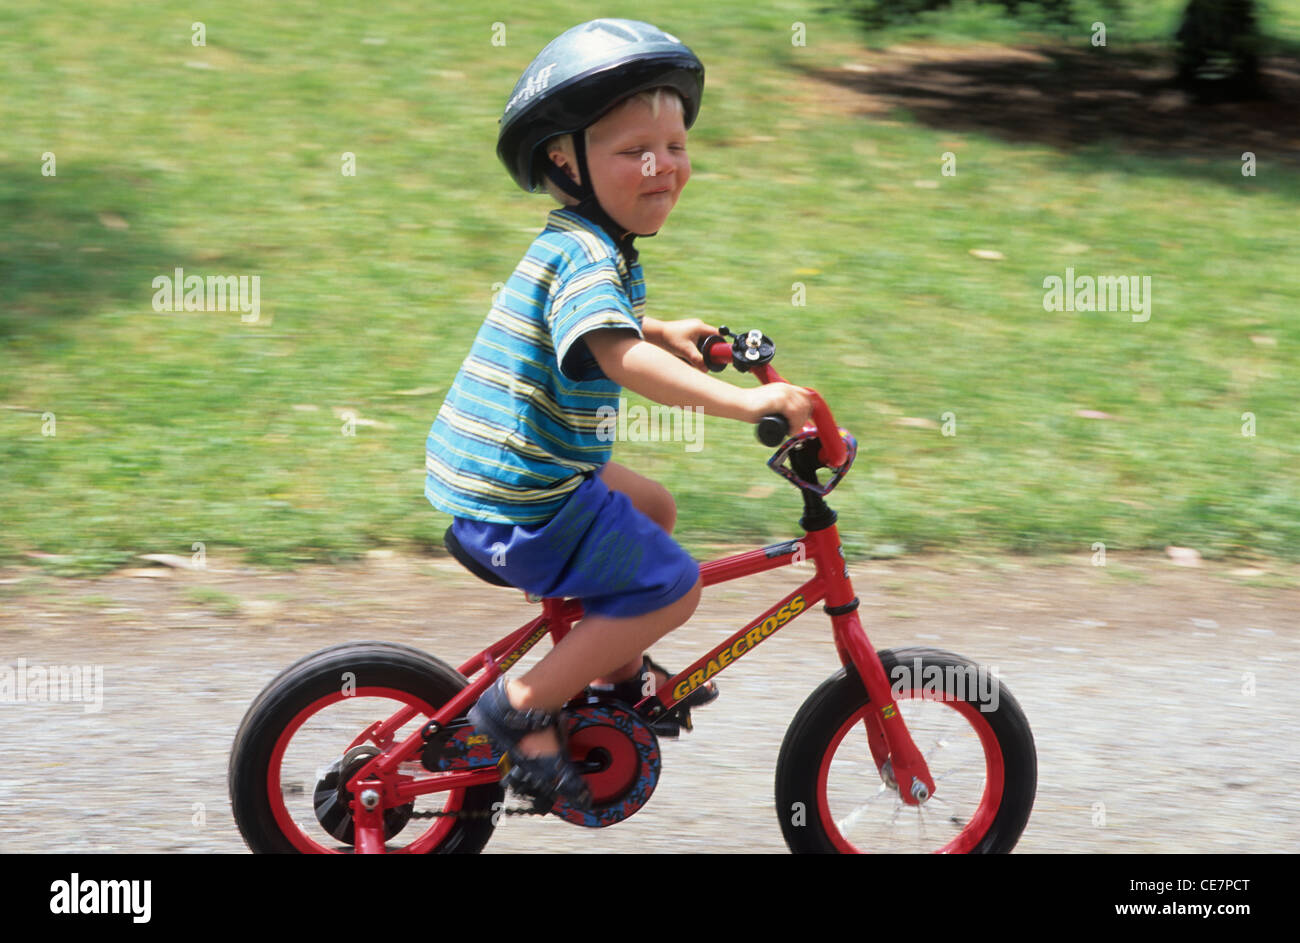 Cycling, young boy on bike with helmet and stabilisers, boy about 2+ years old. Stock Photo